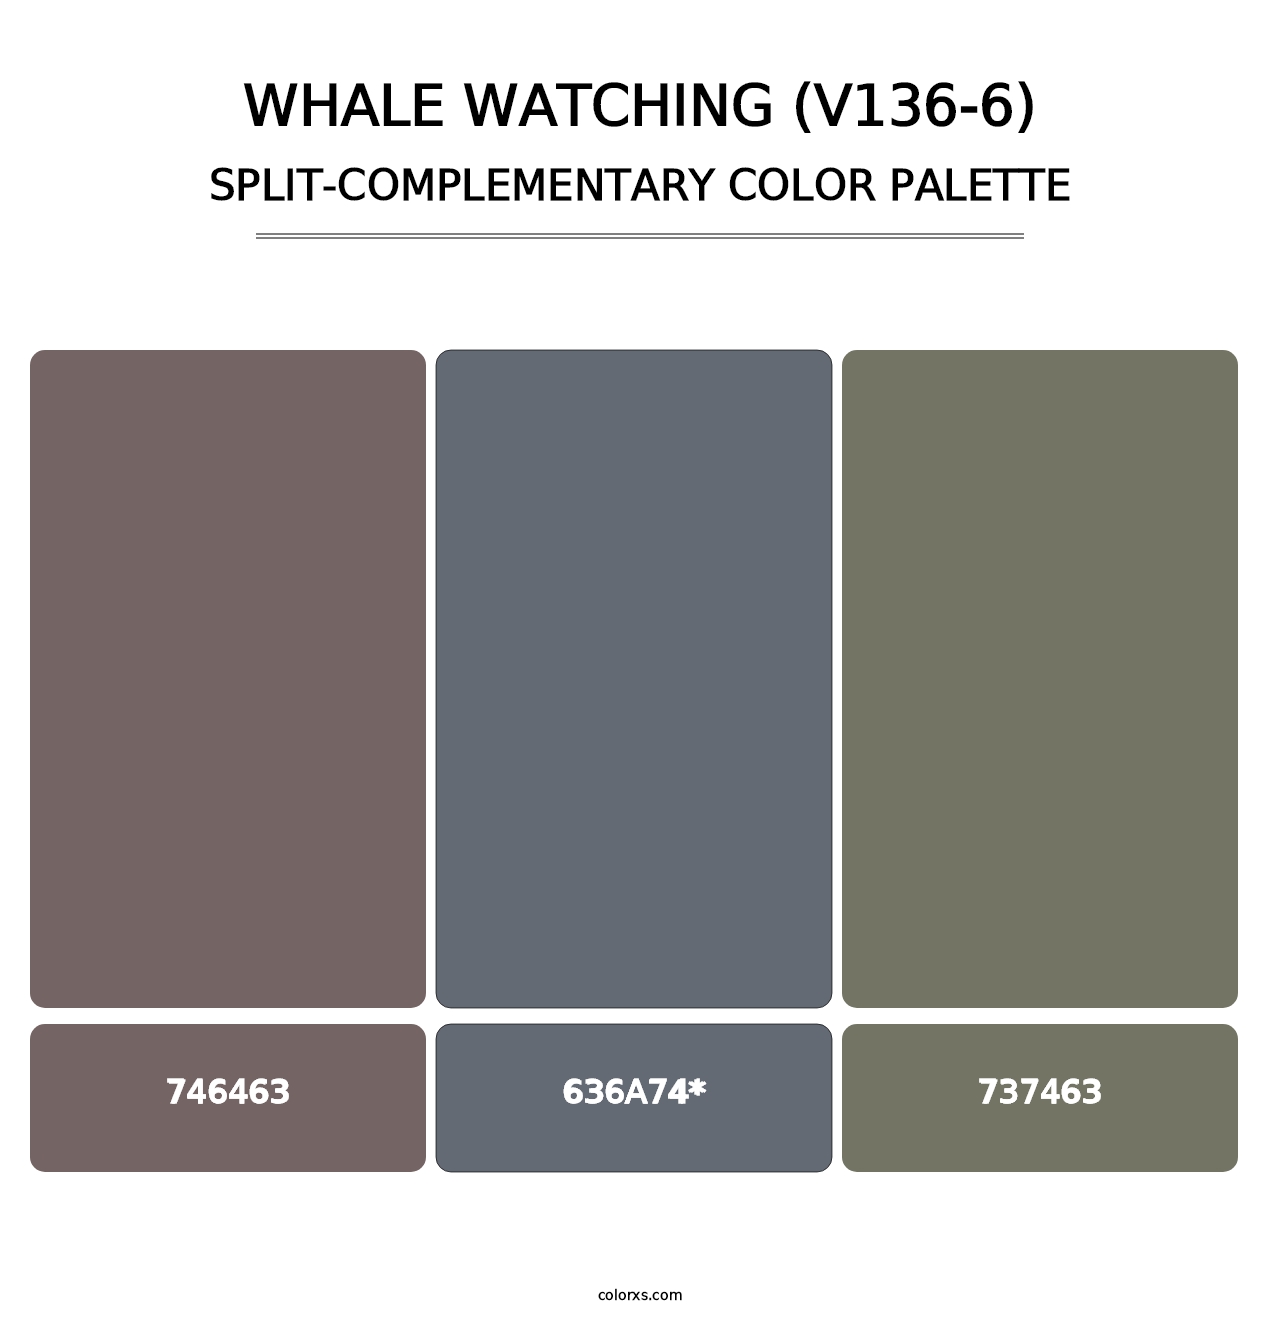 Whale Watching (V136-6) - Split-Complementary Color Palette